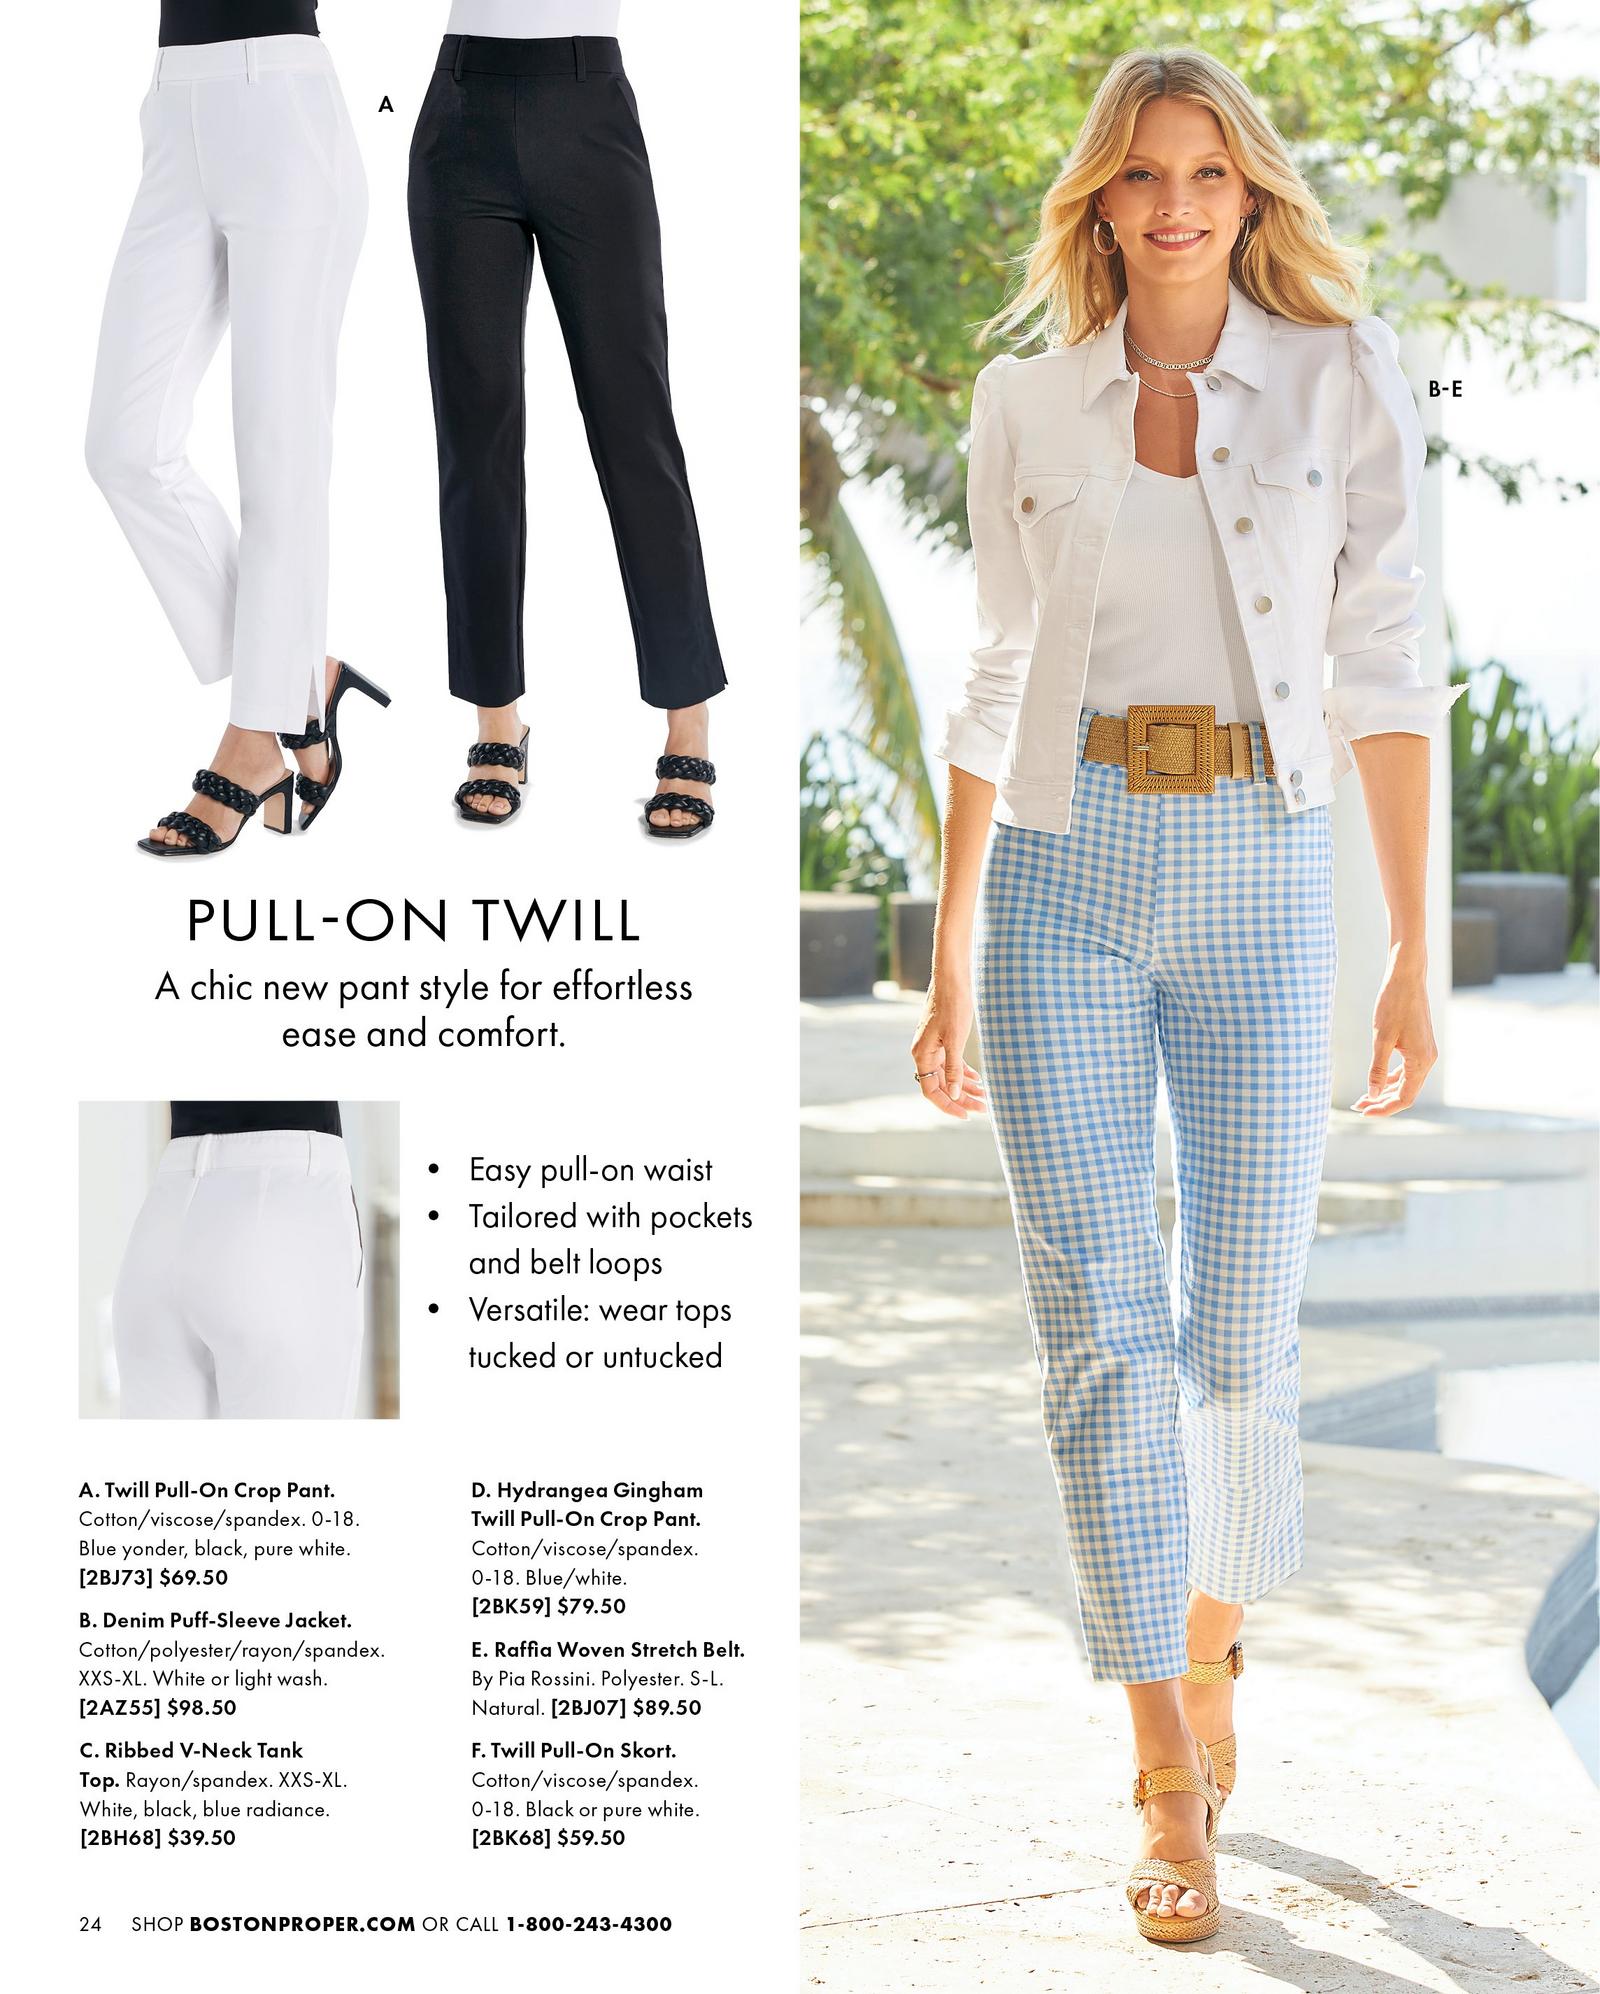 top left models wearing black and white twill pull-on pants. right model wearing a white tank top, white puff-sleeve denim jacket, raffia belt, blue and white gingham twill pull-on crop pant.